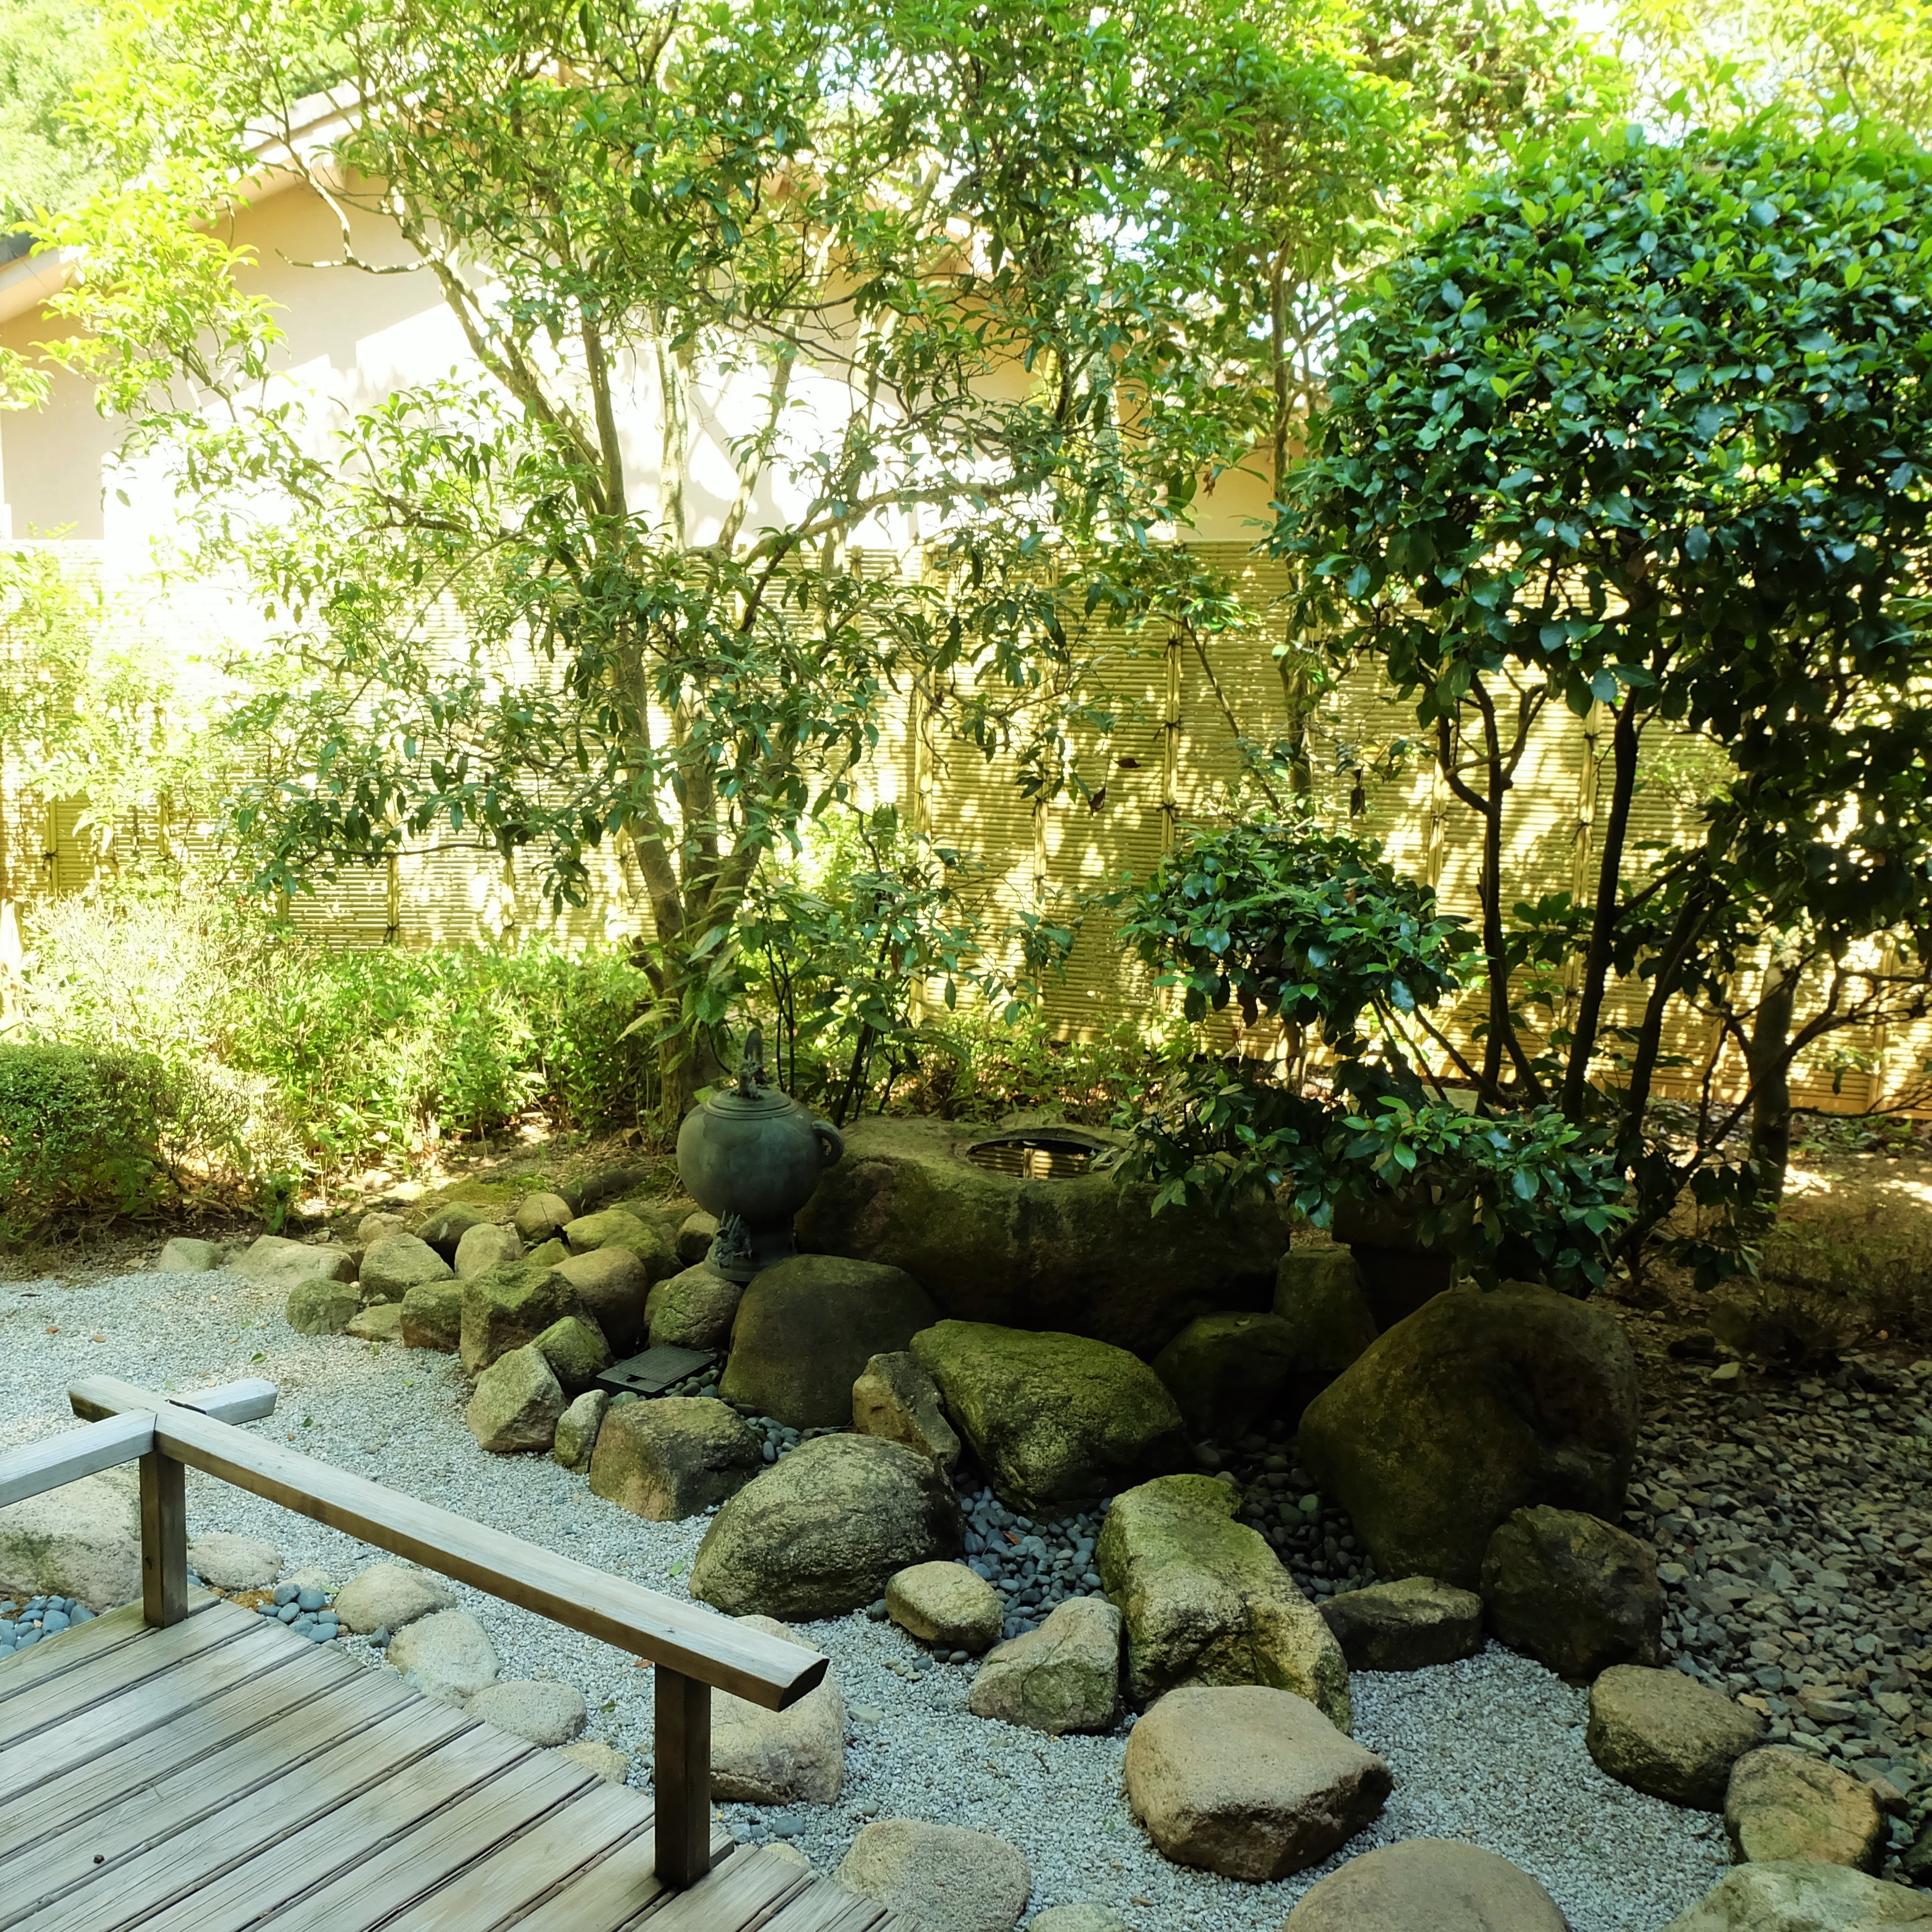 With open-air bath ◆ VIP room Gokusuitei -Kiritsubo- ◆ In the private garden, you can enjoy the atmosphere of a Japanese garden.